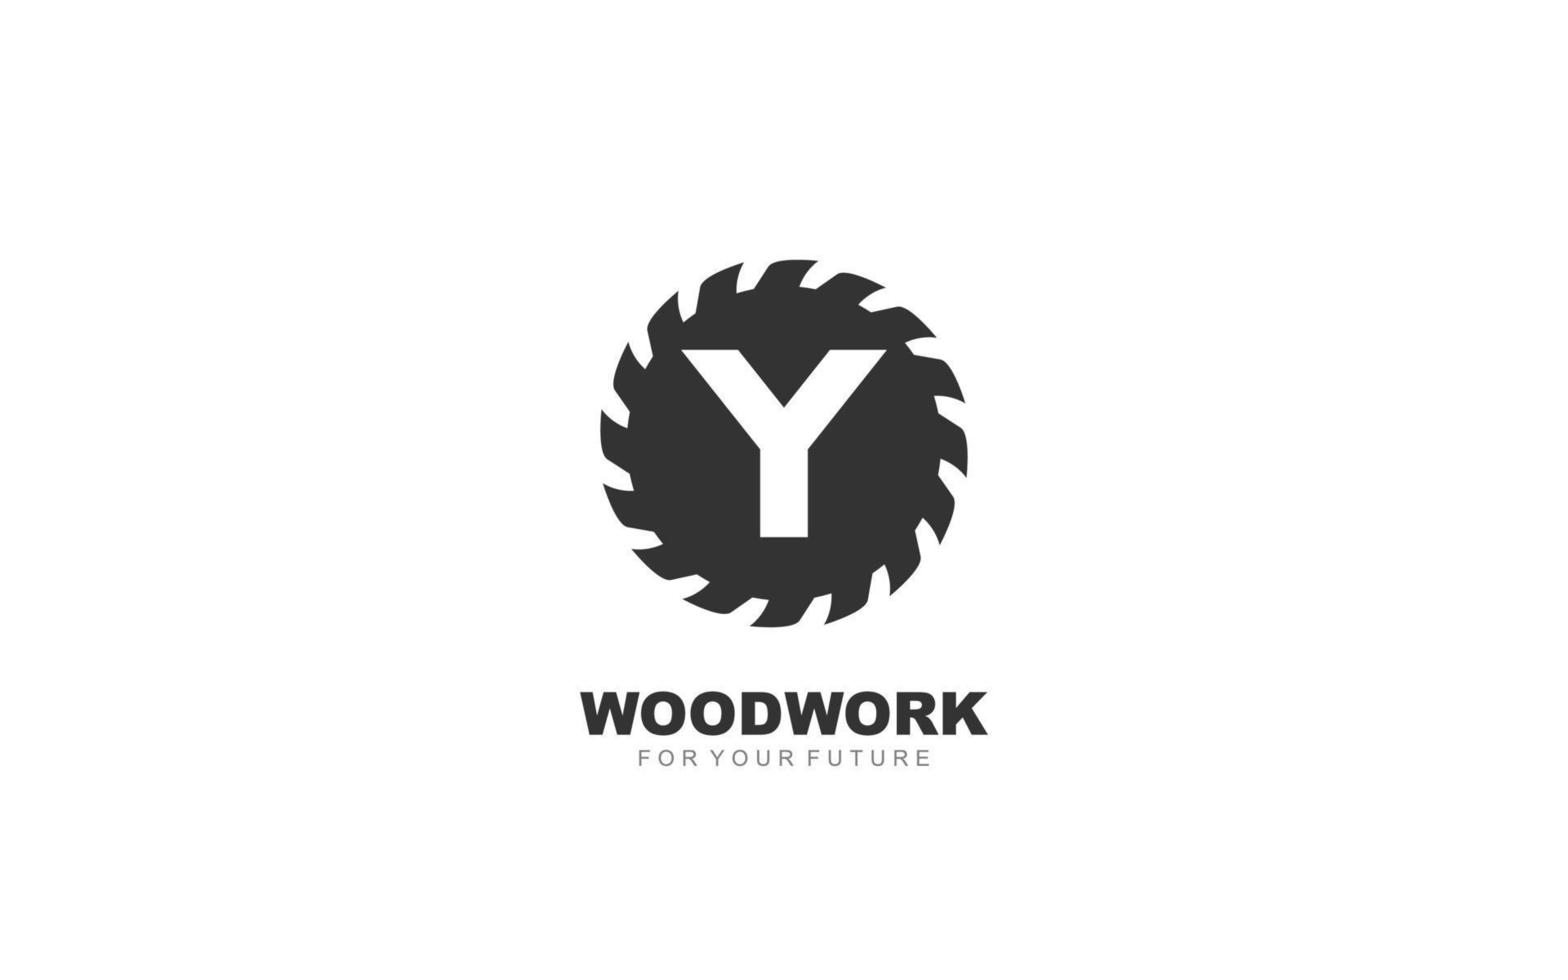 Y logo sawmill vector for woodworking company. initial letter carpentry template vector illustration for your brand.